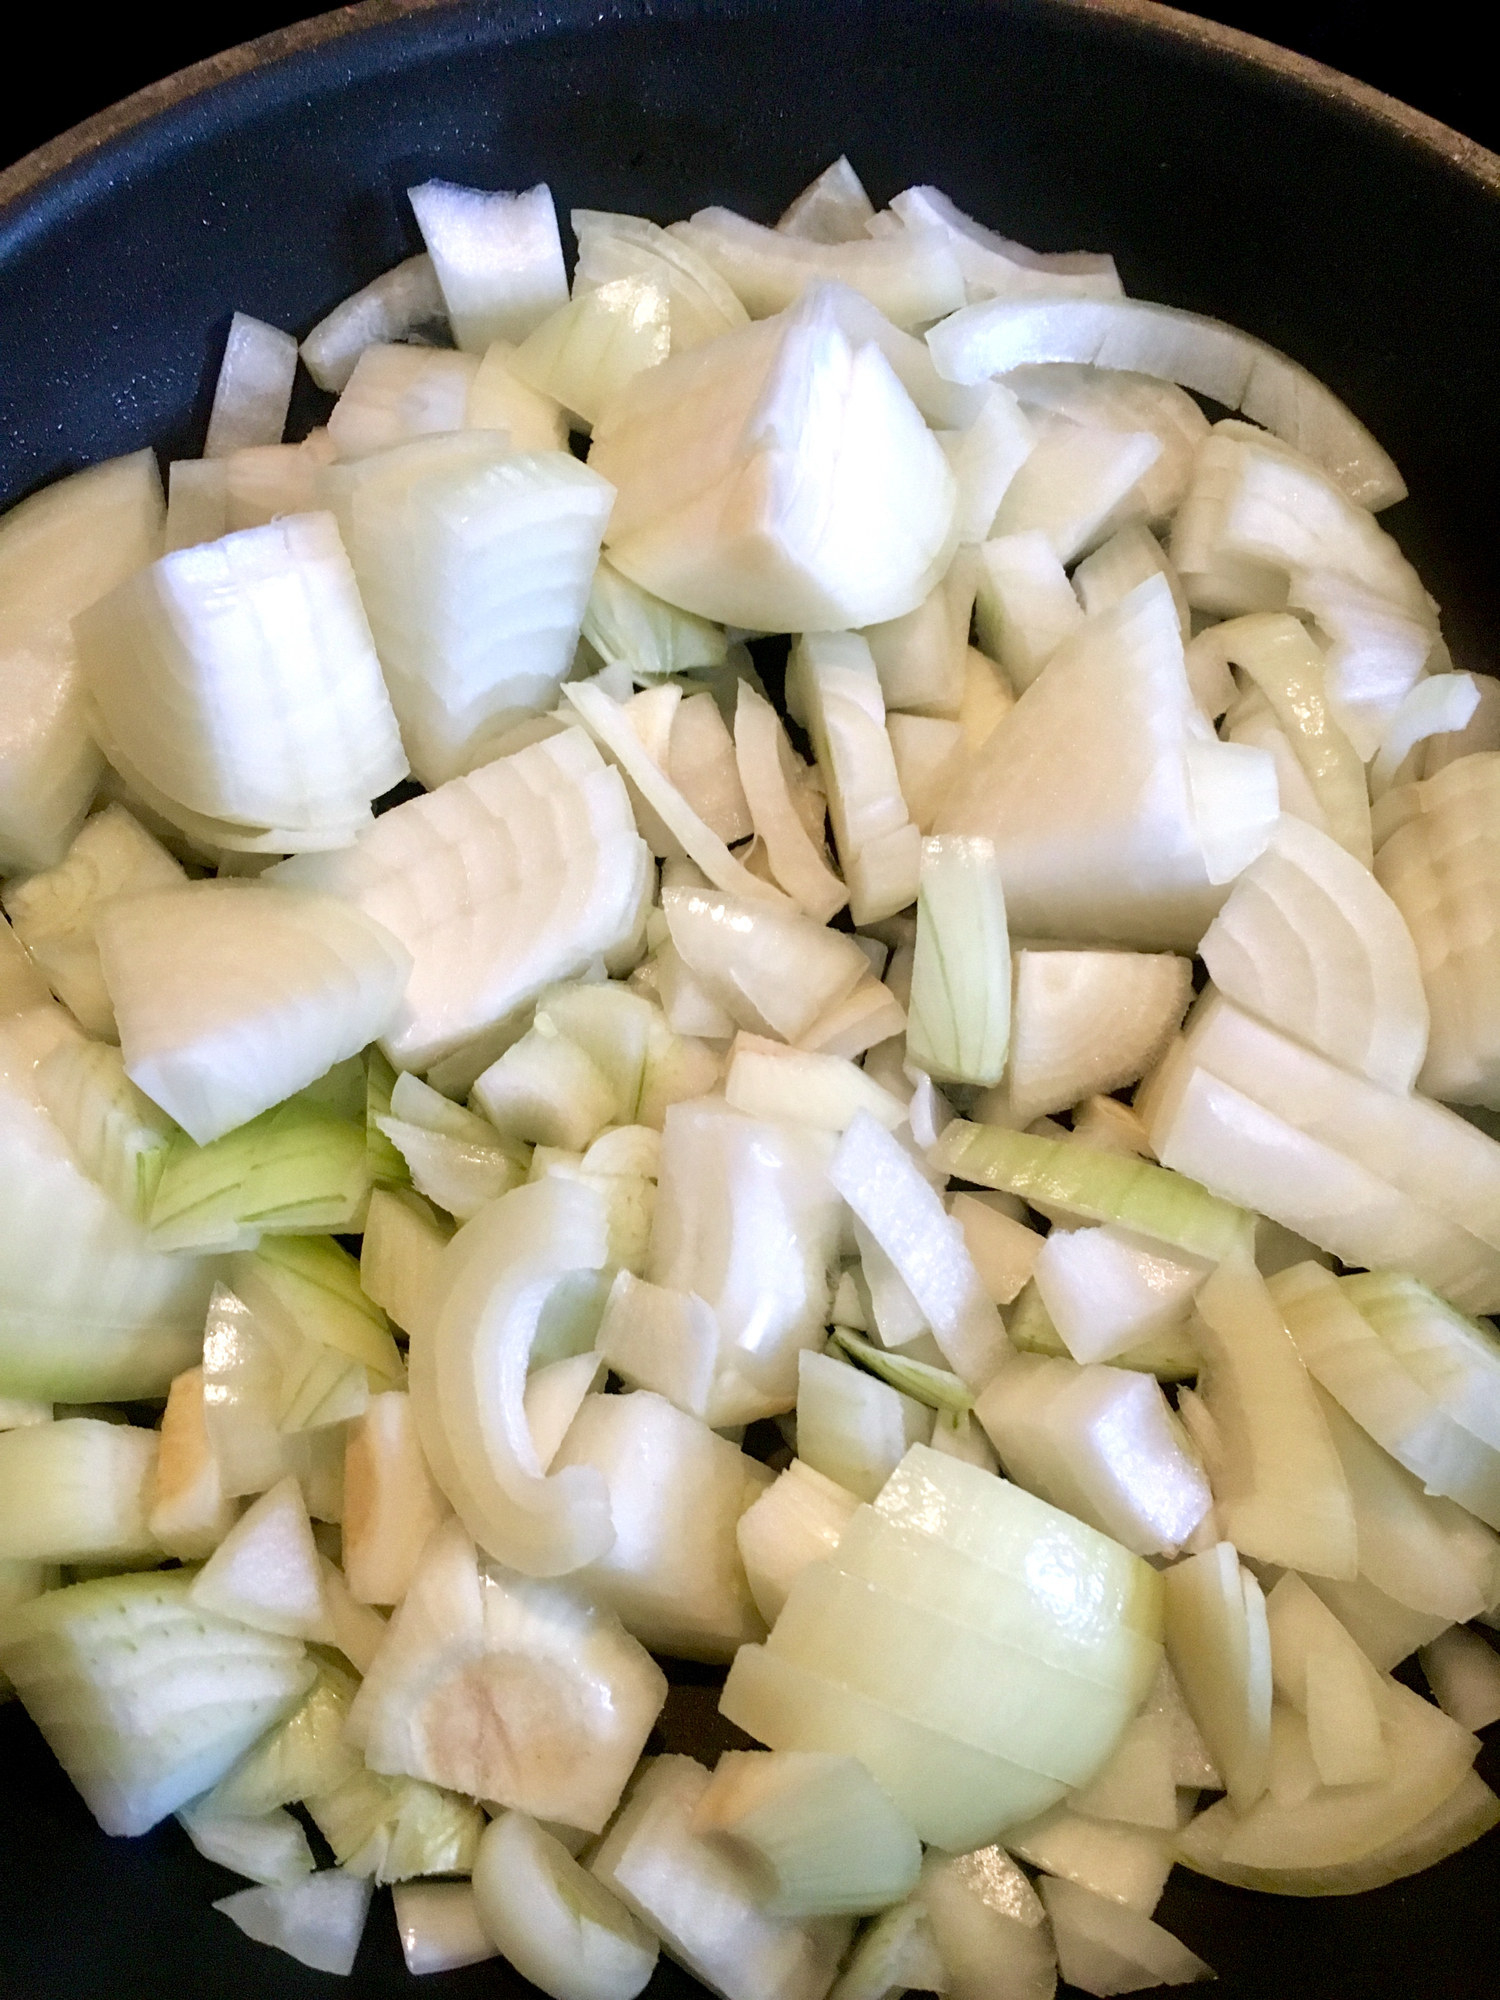 Chopped onion in a skillet.